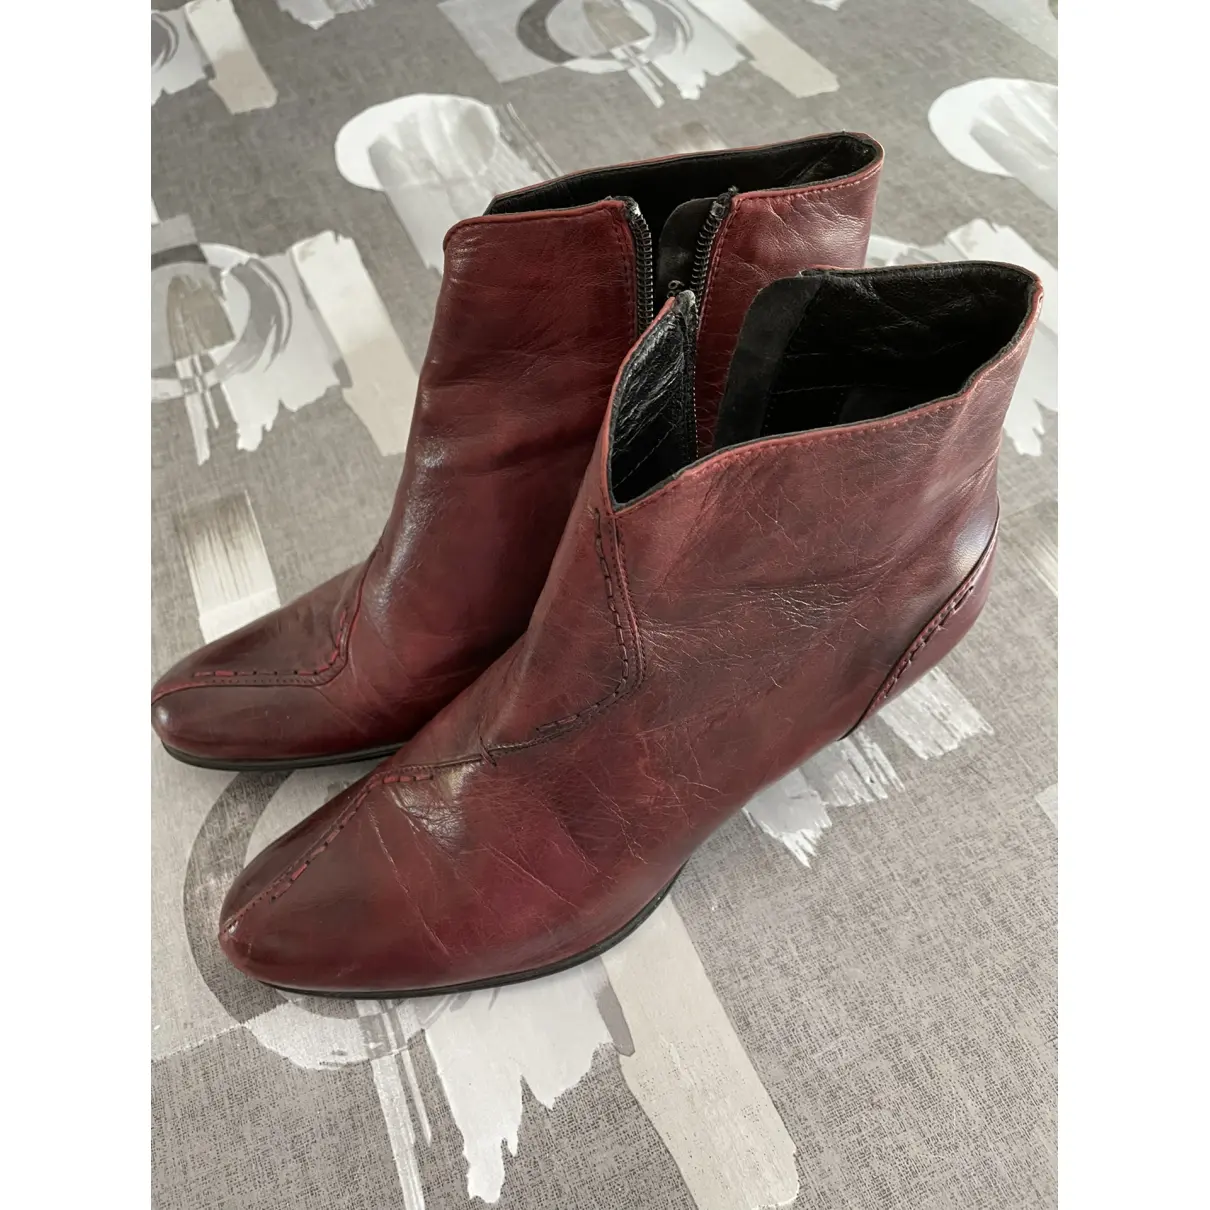 Buy HEYRAUD Leather ankle boots online - Vintage